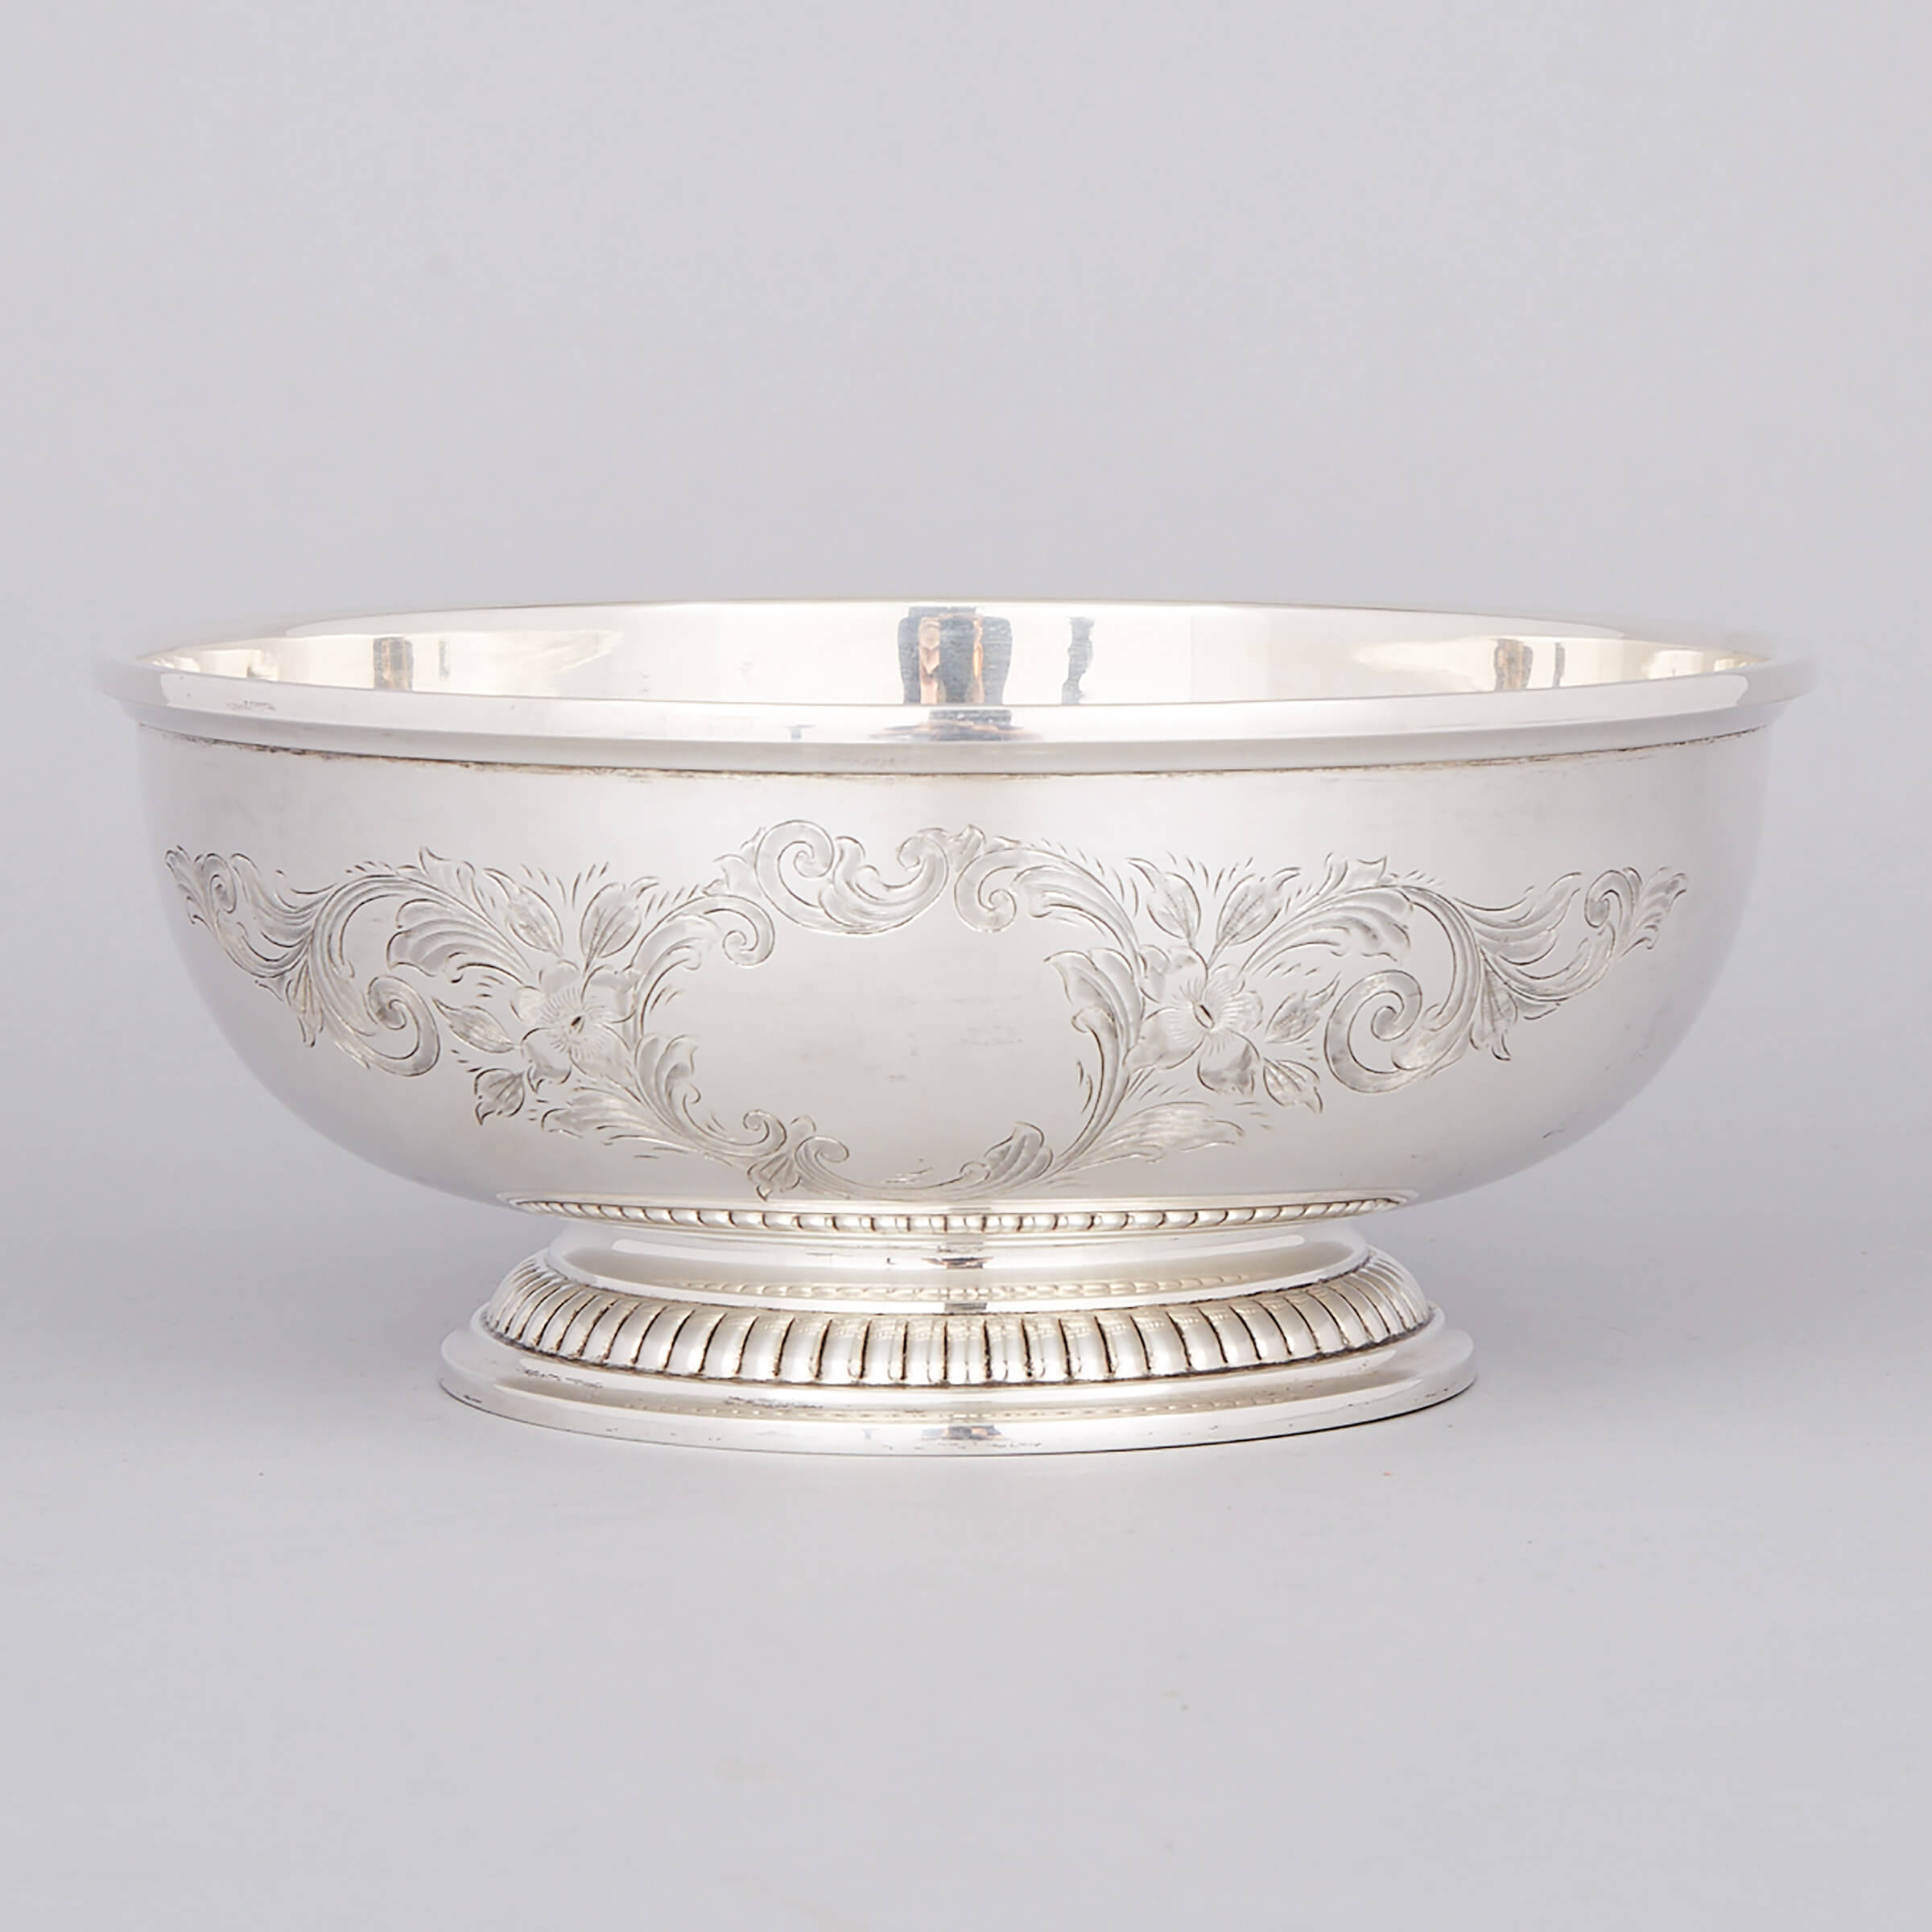 Canadian Silver Bowl, Henry Birks & Sons, Montreal, Que., 1960